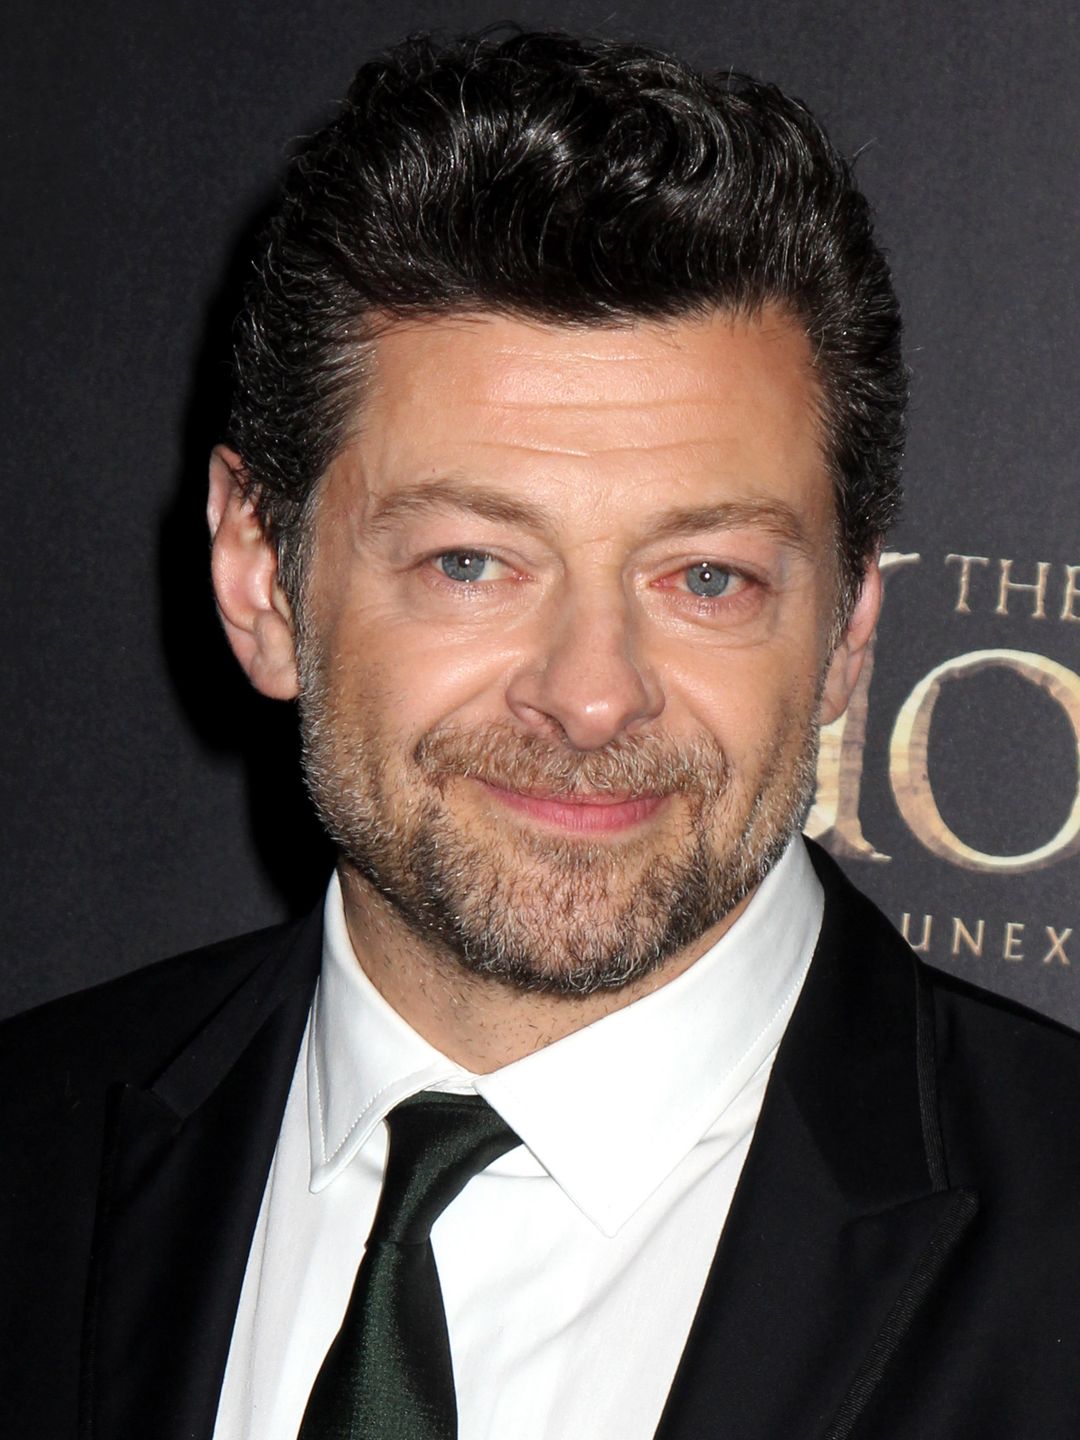 Andy Serkis who is his father